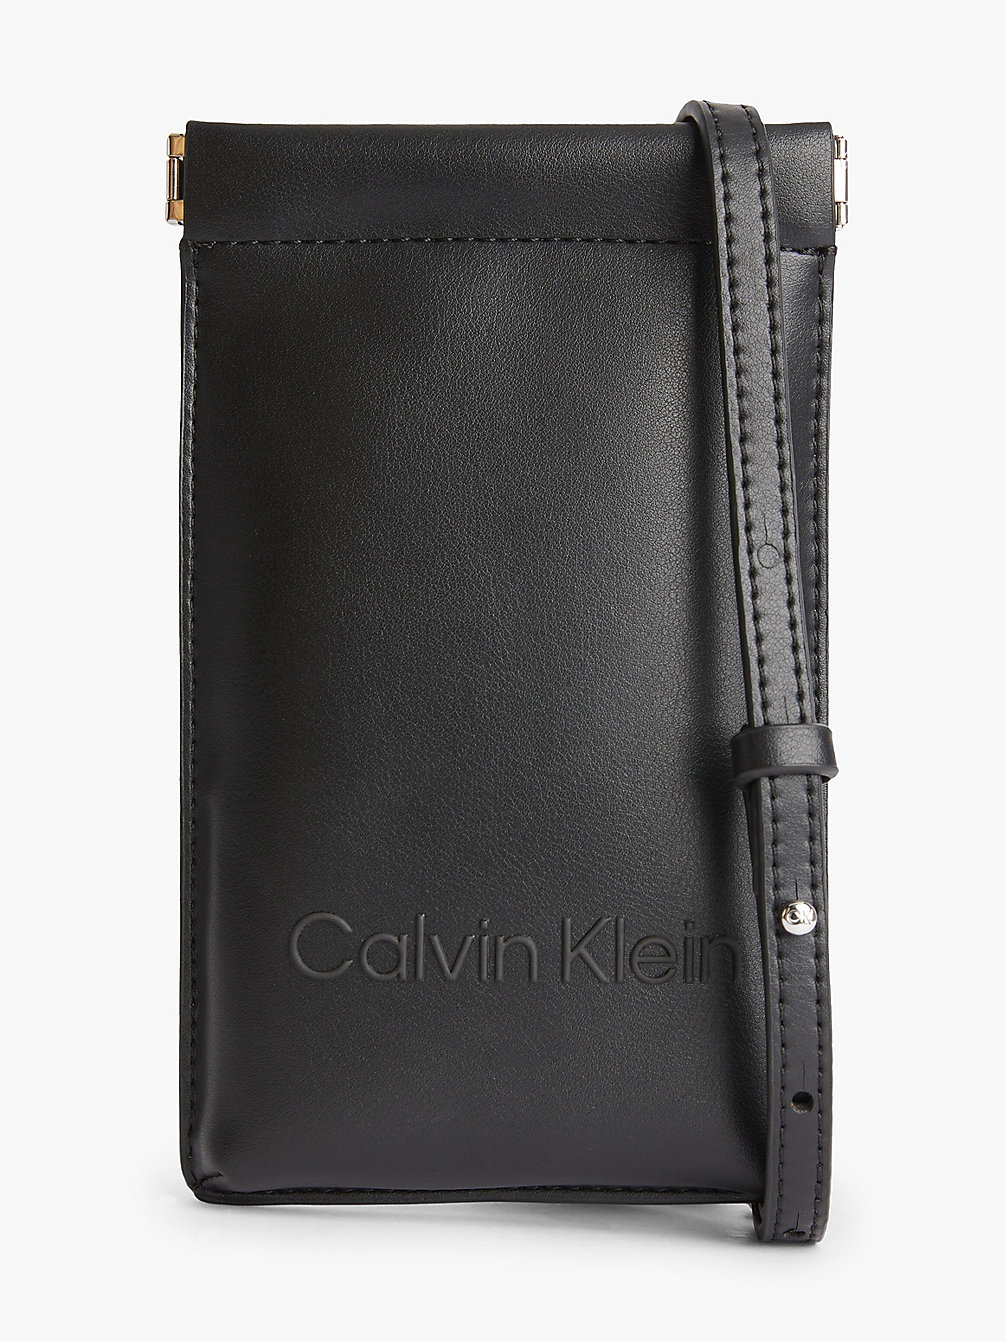 CK BLACK Recycled Crossbody Phone Pouch undefined women Calvin Klein